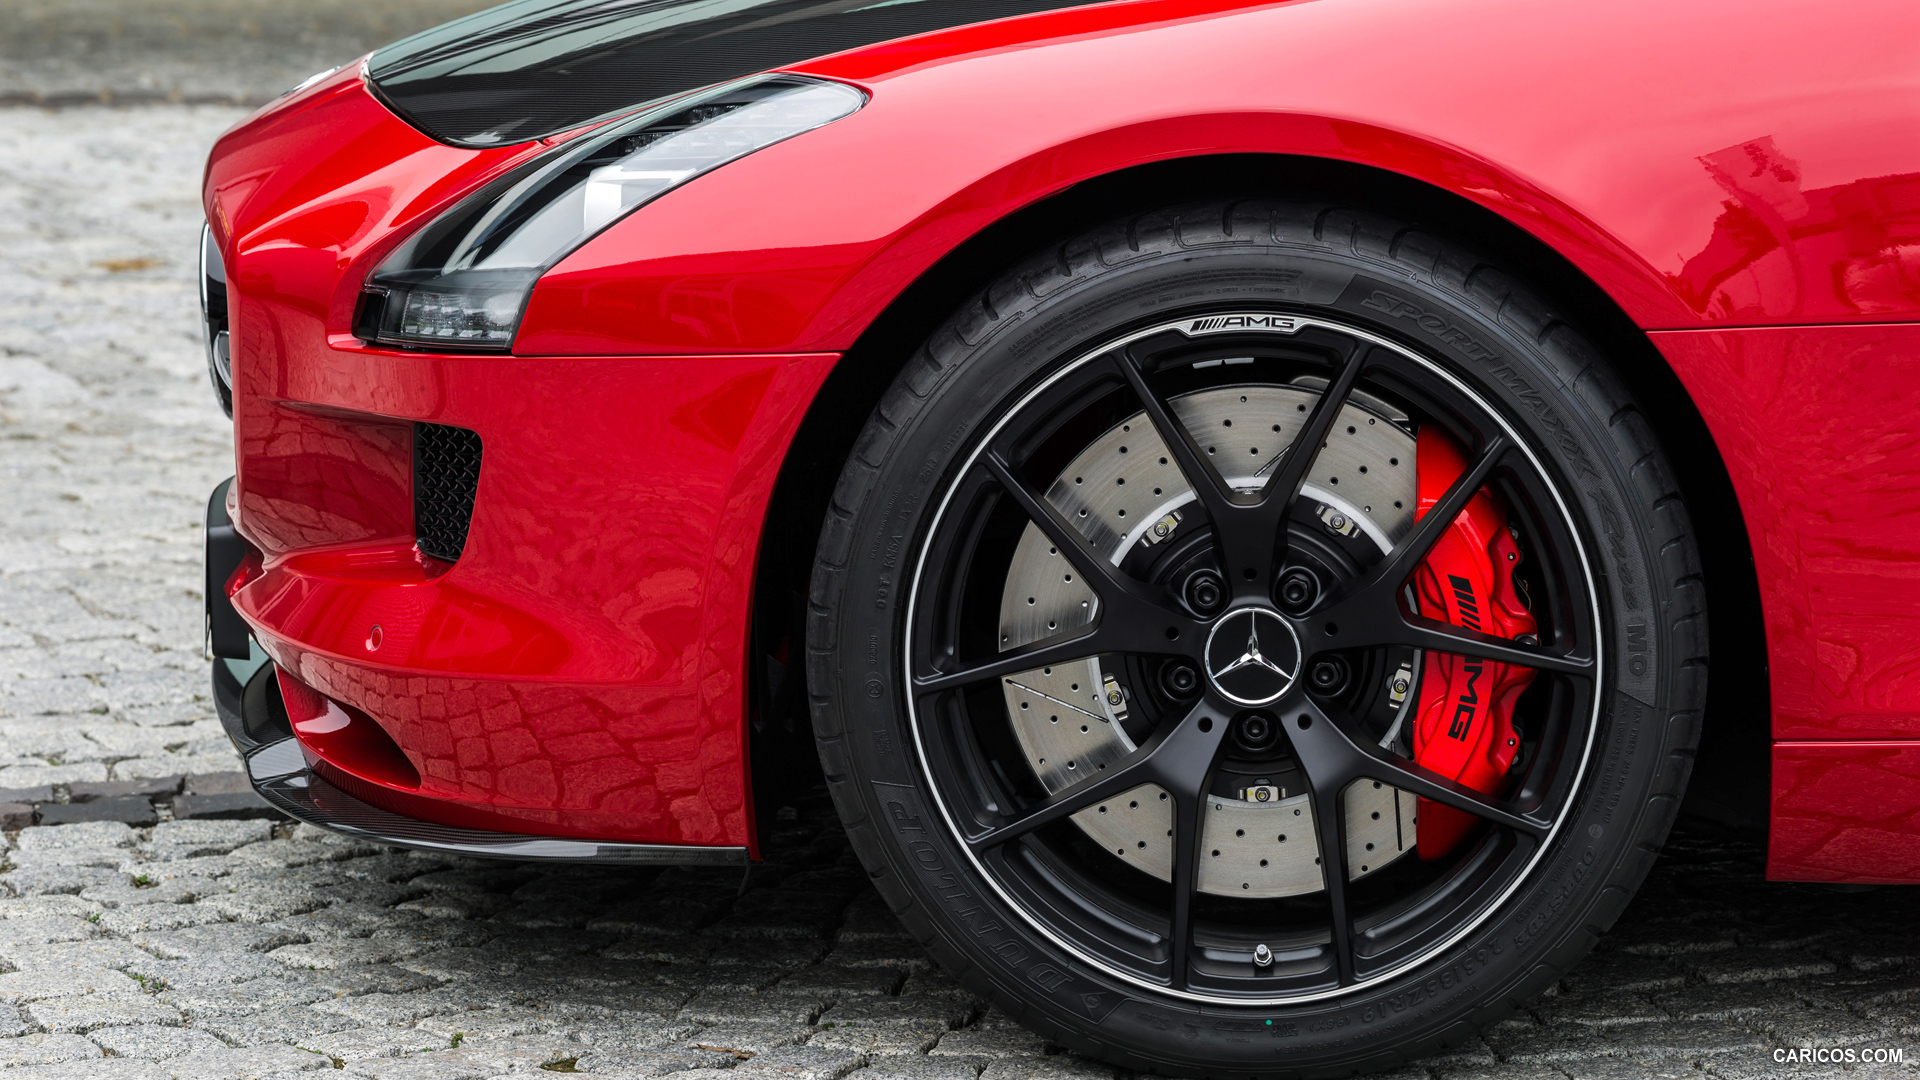  2015 Mercedes-Benz SLS AMG GT Coupe Final Edition - Wheel, #27 of 41